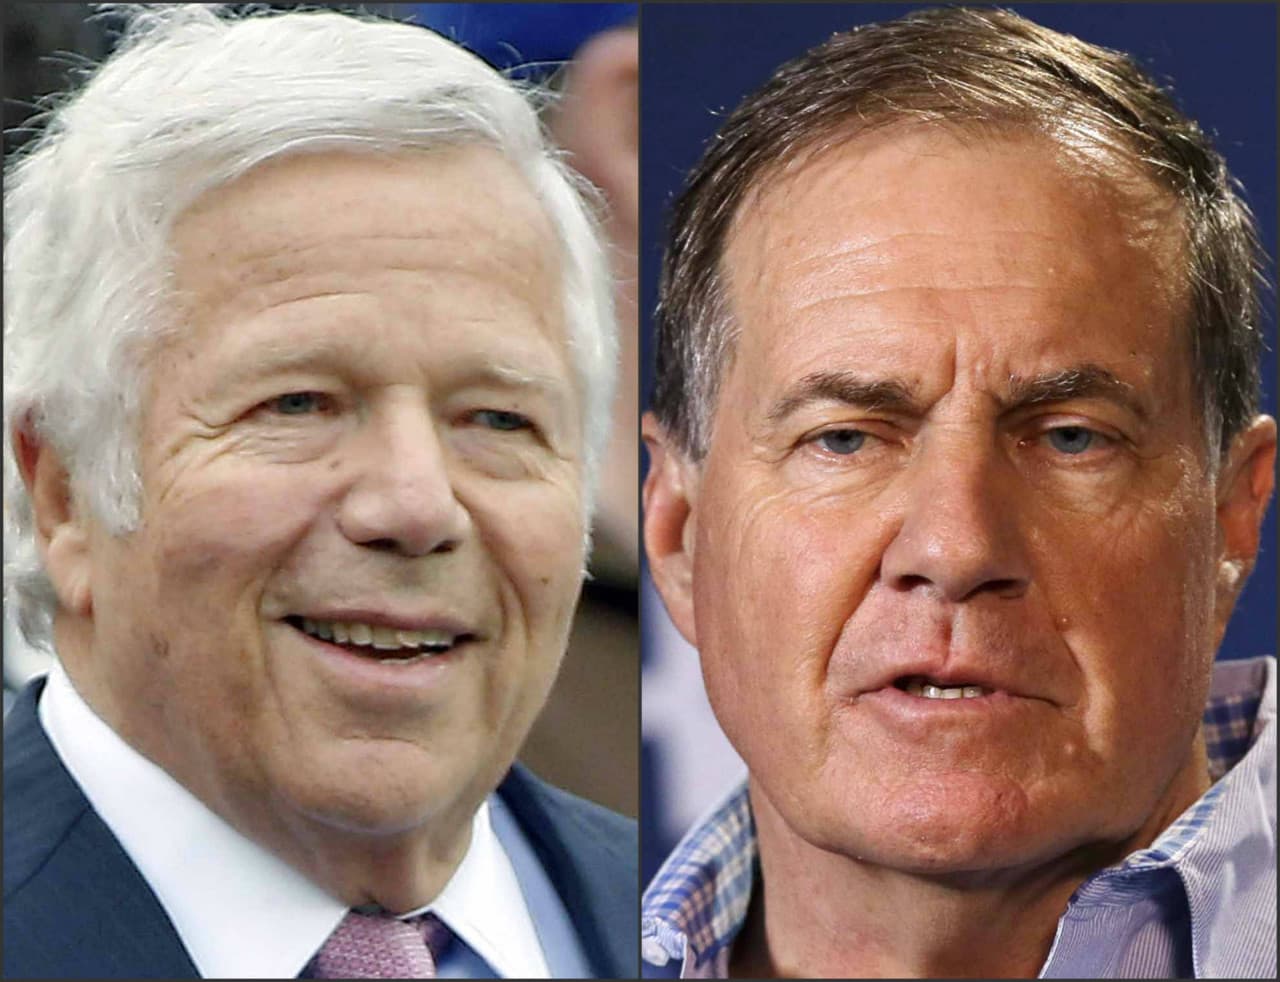 From left to right, Robert Kraft and Bill Belichick (AP)